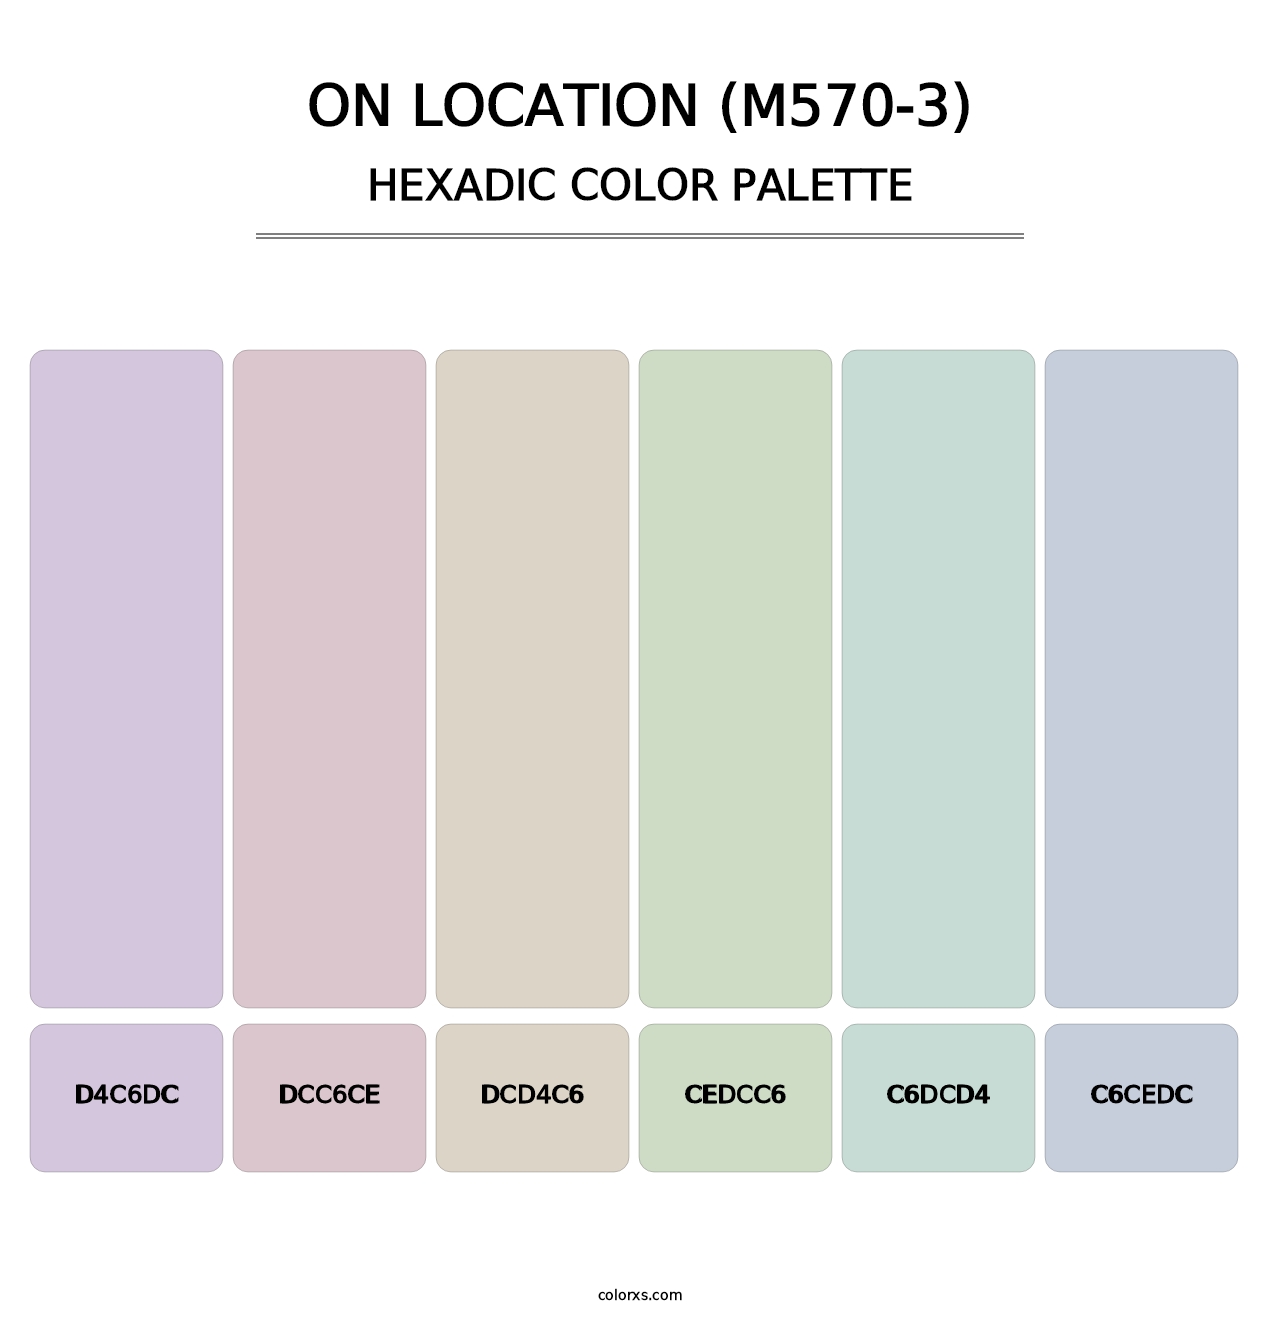 On Location (M570-3) - Hexadic Color Palette